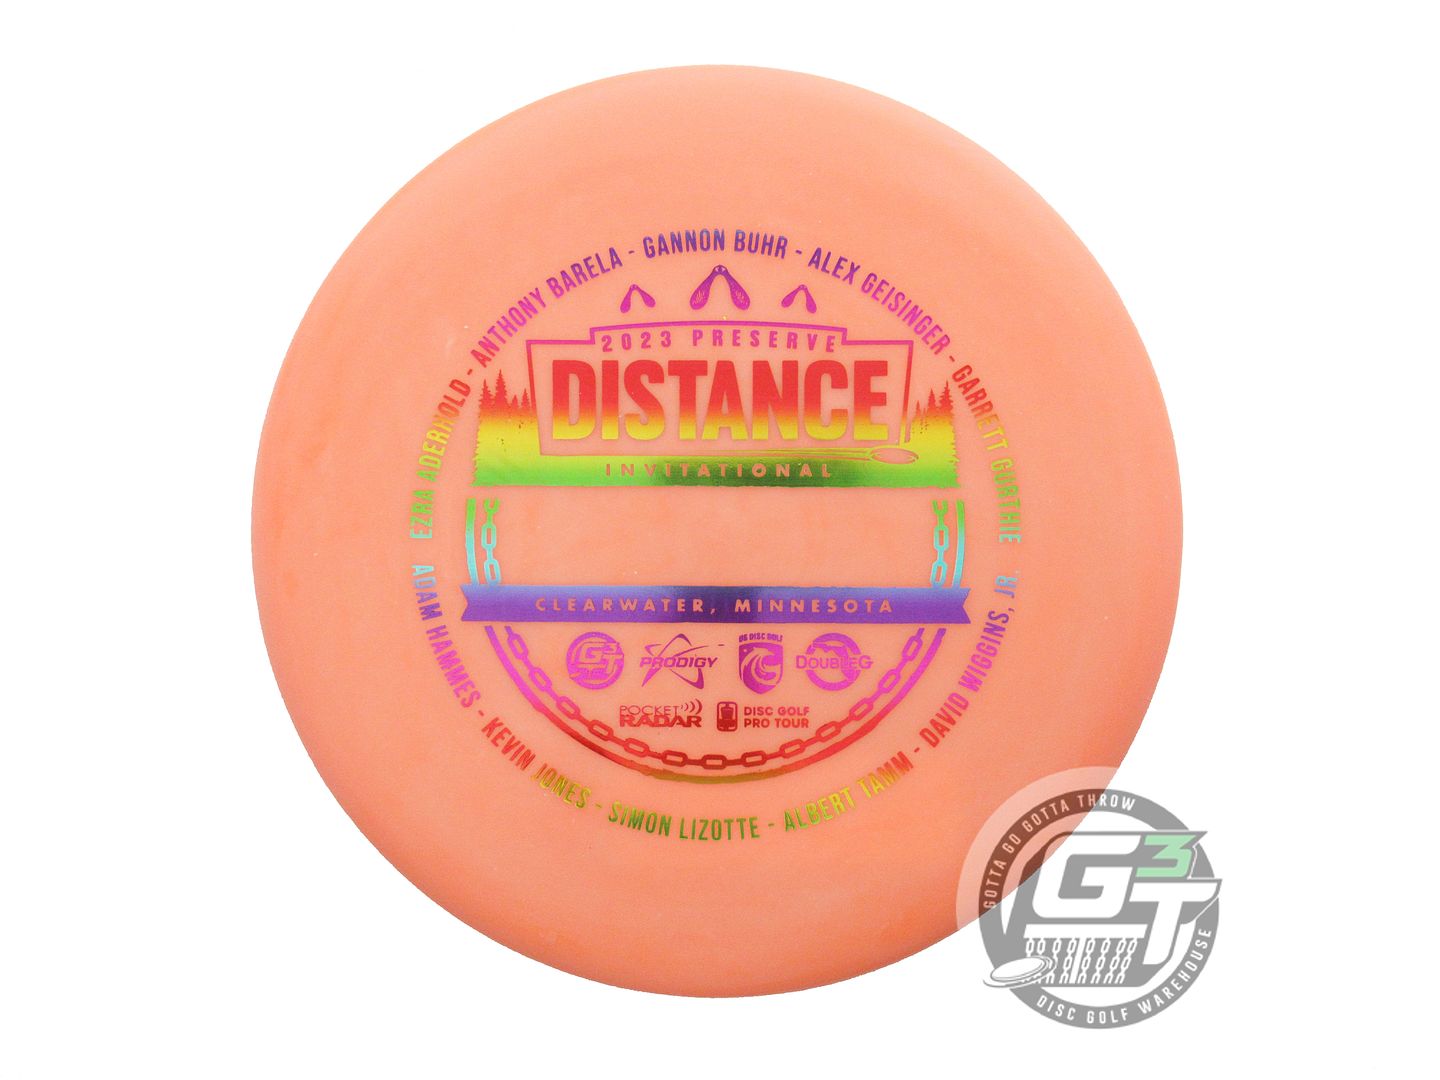 Prodigy Limited Edition 2023 Preserve Distance Invitational 300 Series PA3 Putter Golf Disc (Individually Listed)